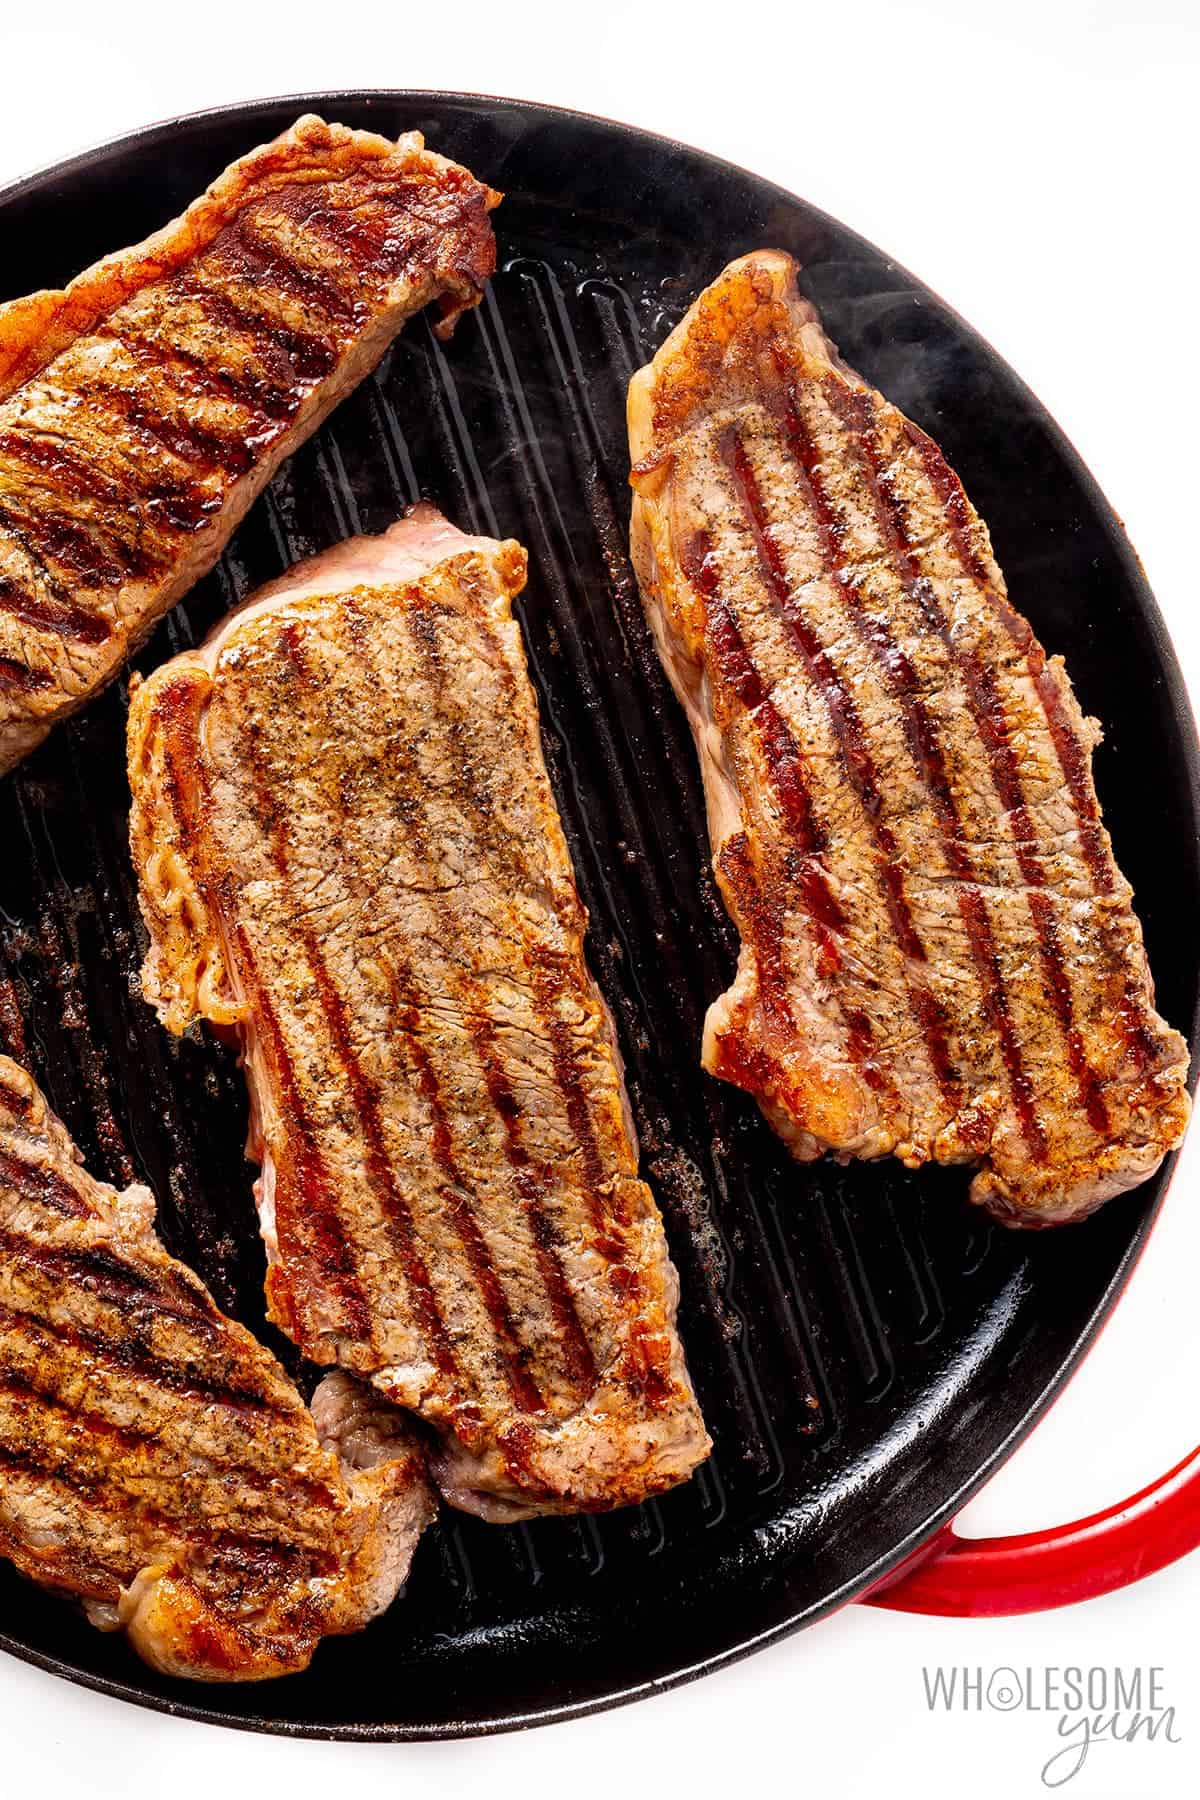 Showing how to cook New York strip steak in a cast iron pan.